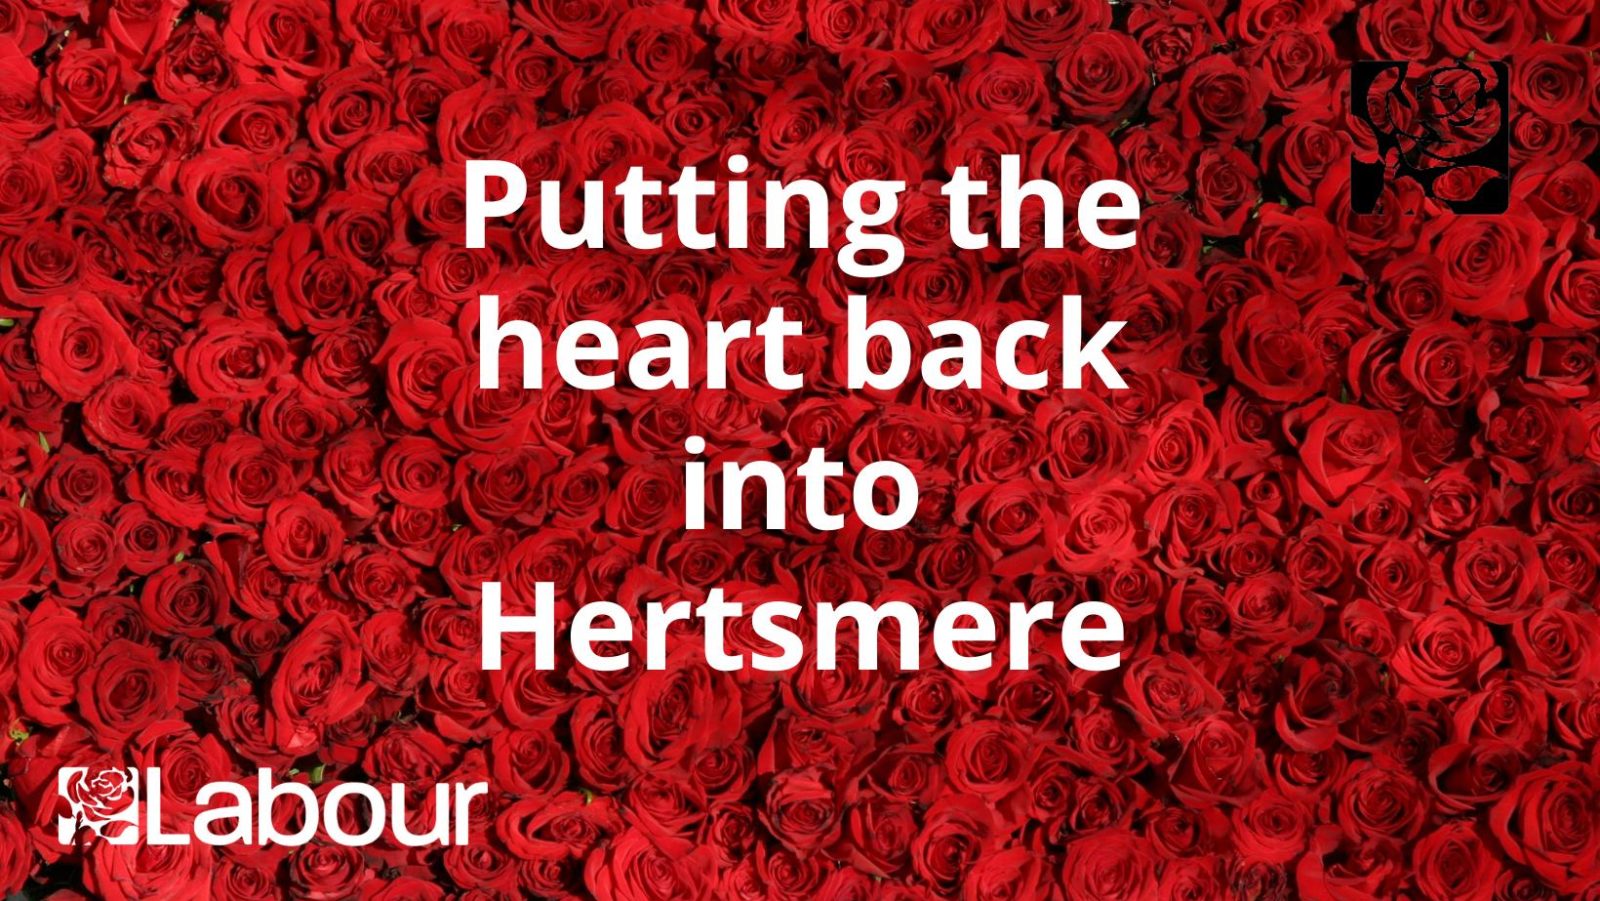 Putting the heart back into Hertsmere